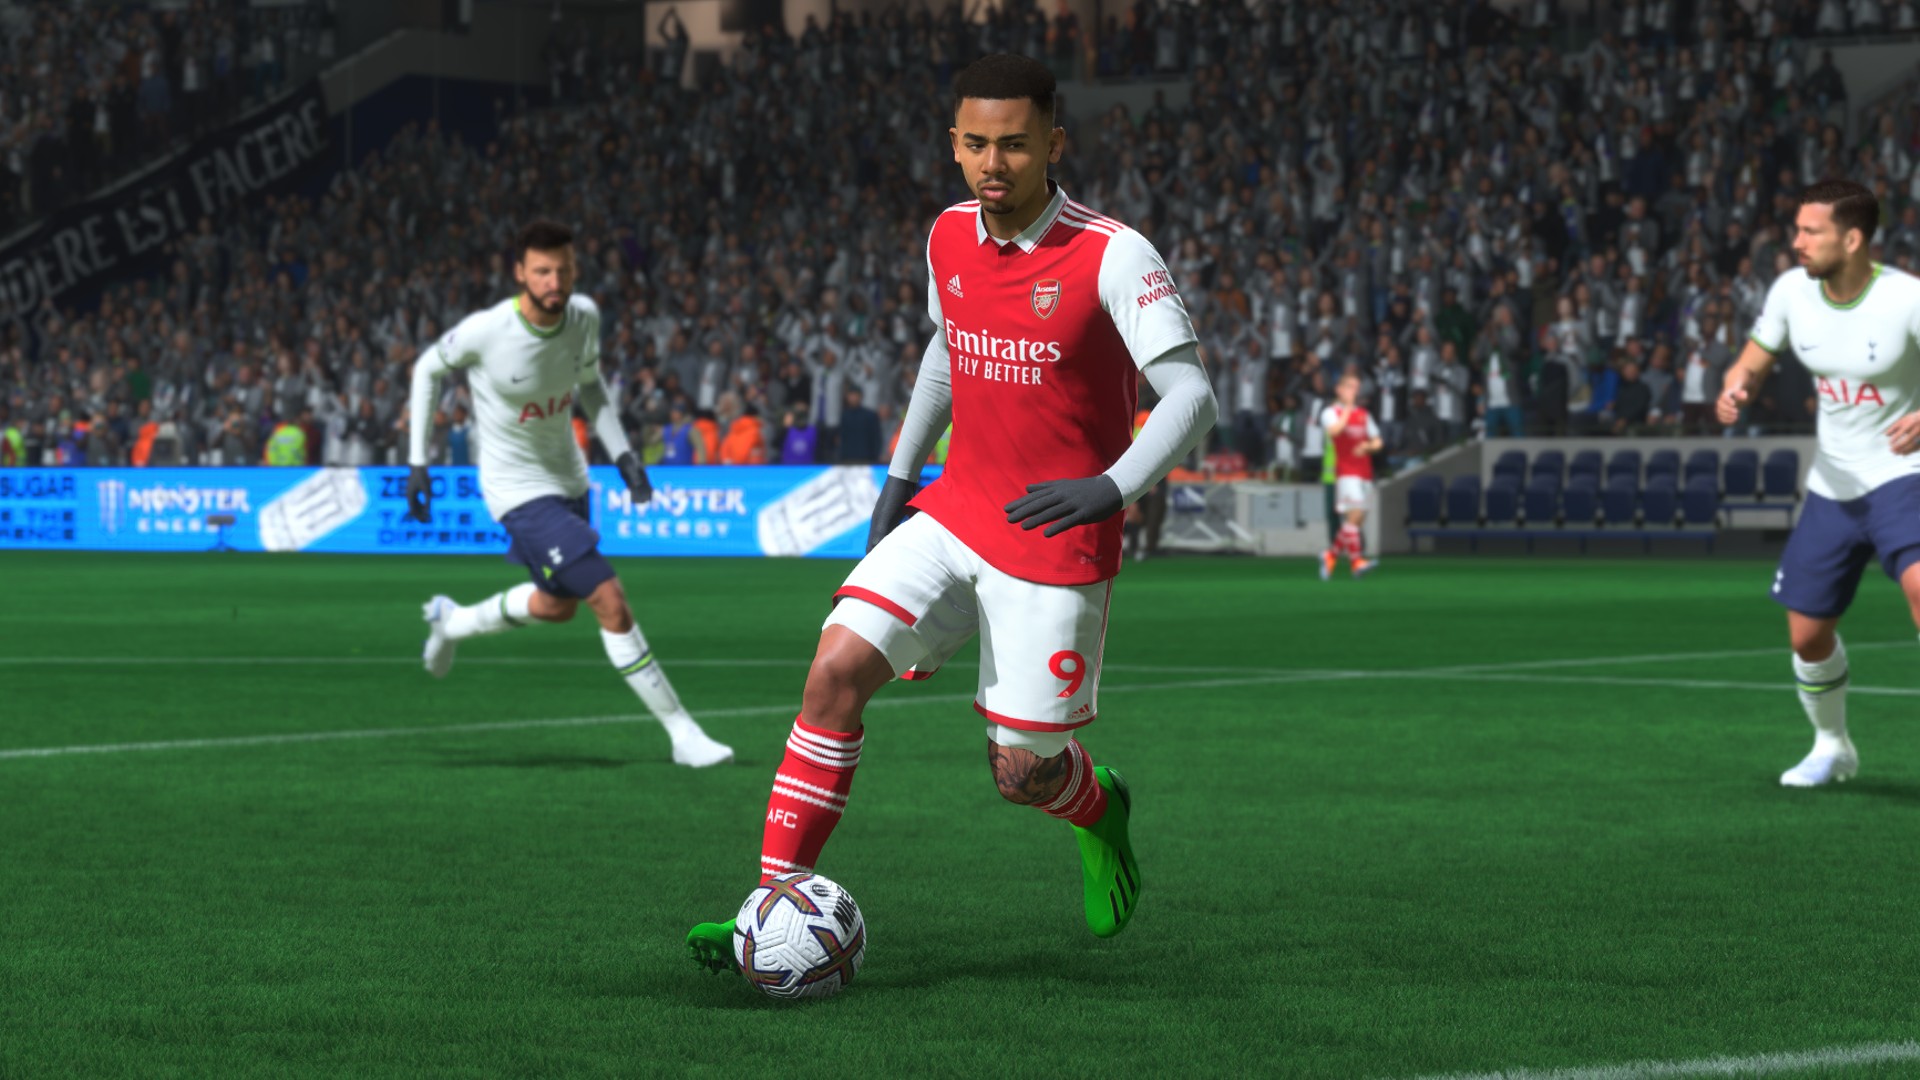 Get a free FIFA 23 Ultimate Team pack with Prime Gaming this month